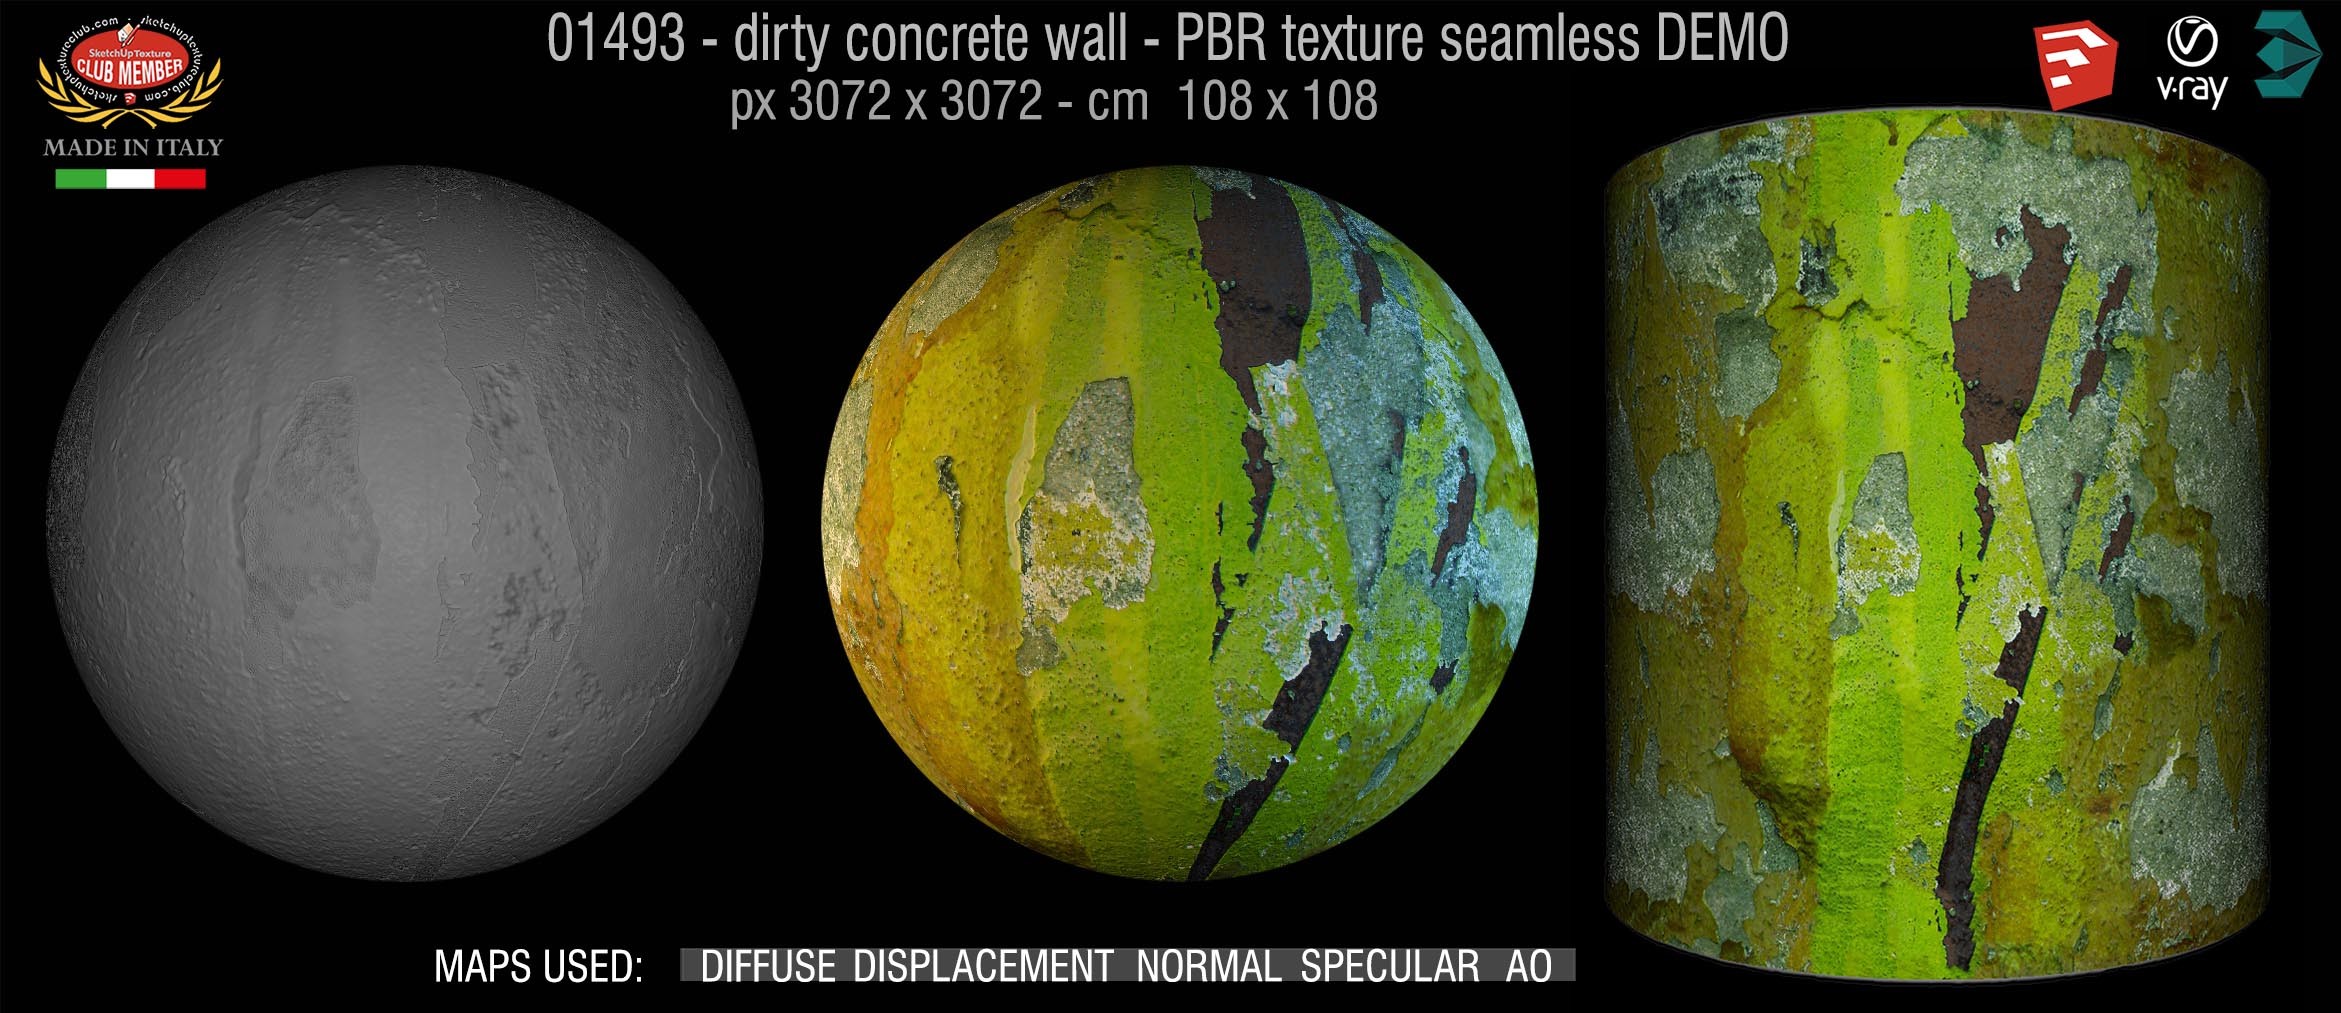 01493 Concrete bare dirty wall PBR texture seamless DEMO